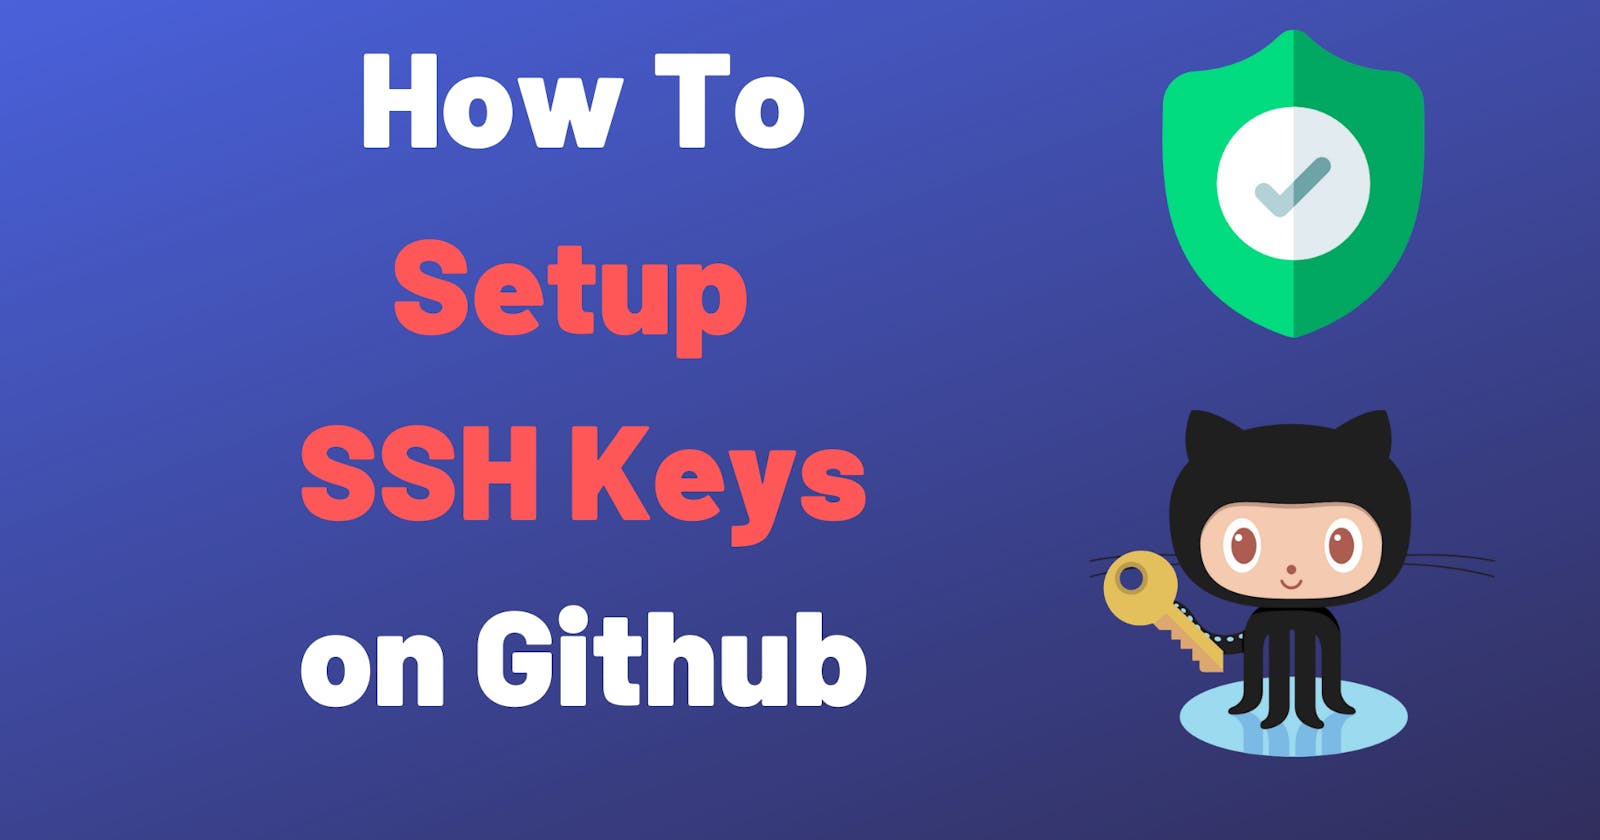 How to setup SSH for Github in Linux?